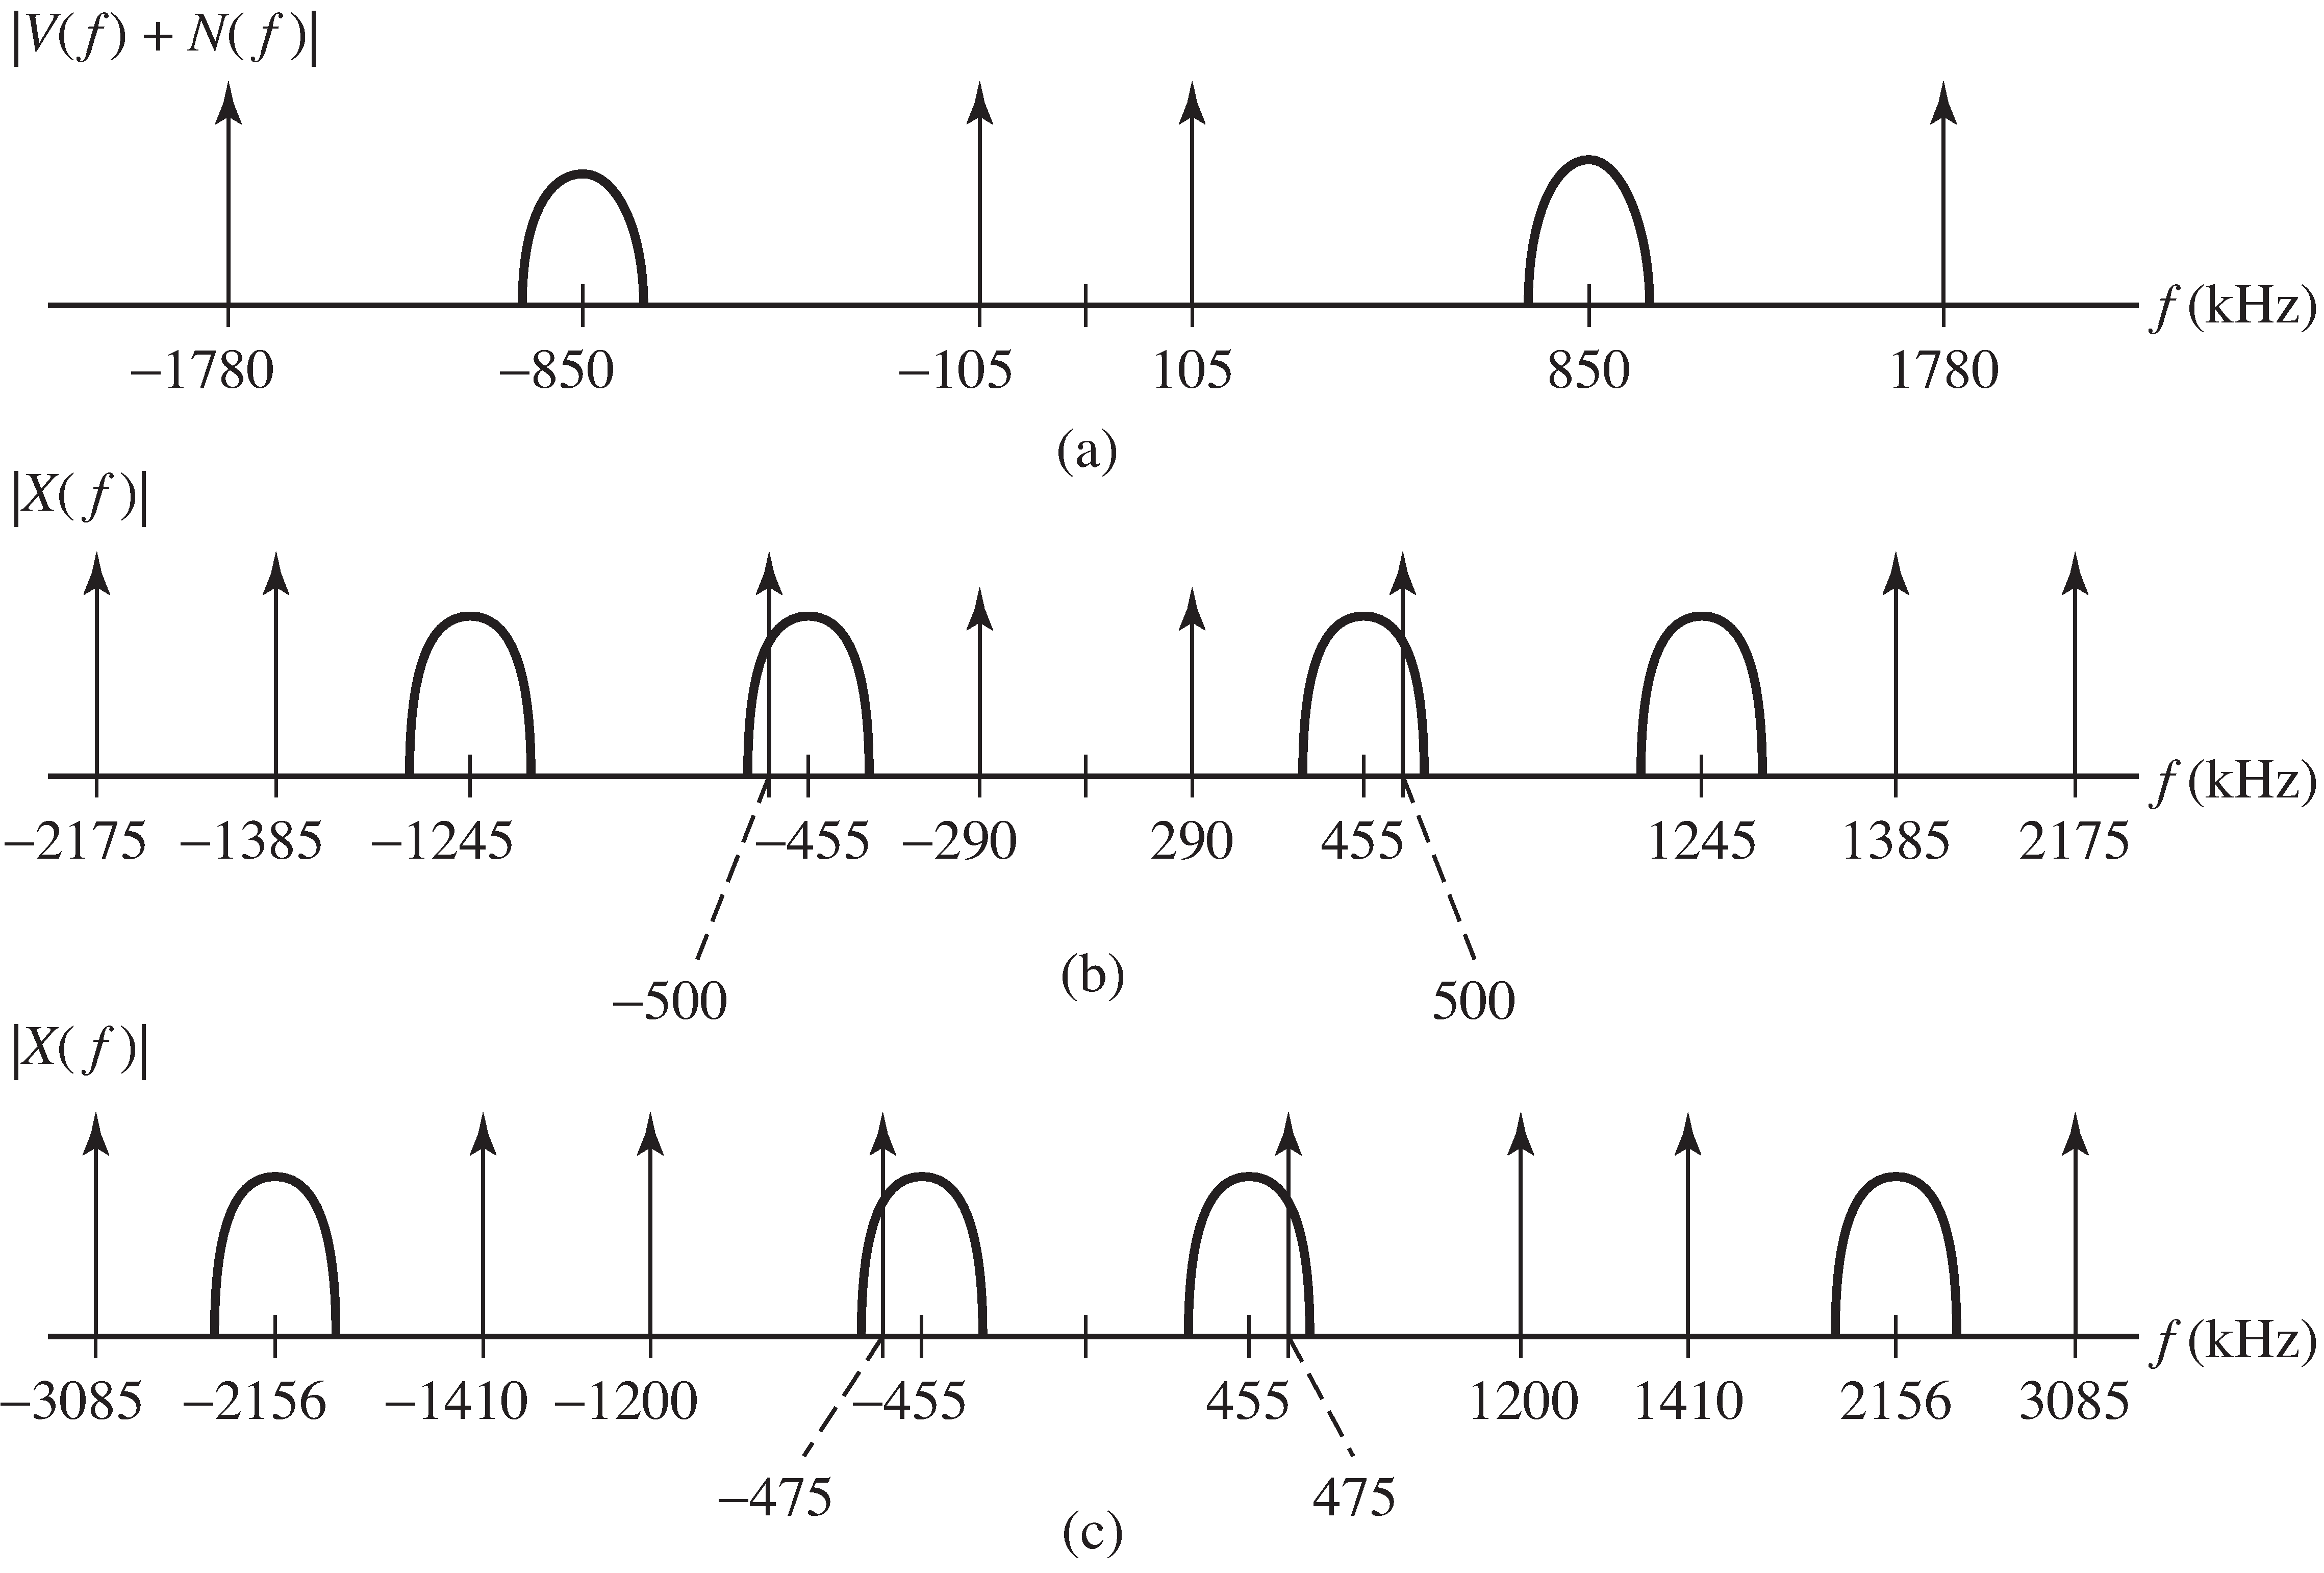 Example of high-side and low-side injection to an IF at f_I=455 kHz. (a) transmitted spectrum, (b) low-side injected spectrum, and (c) high-side injected spectrum.